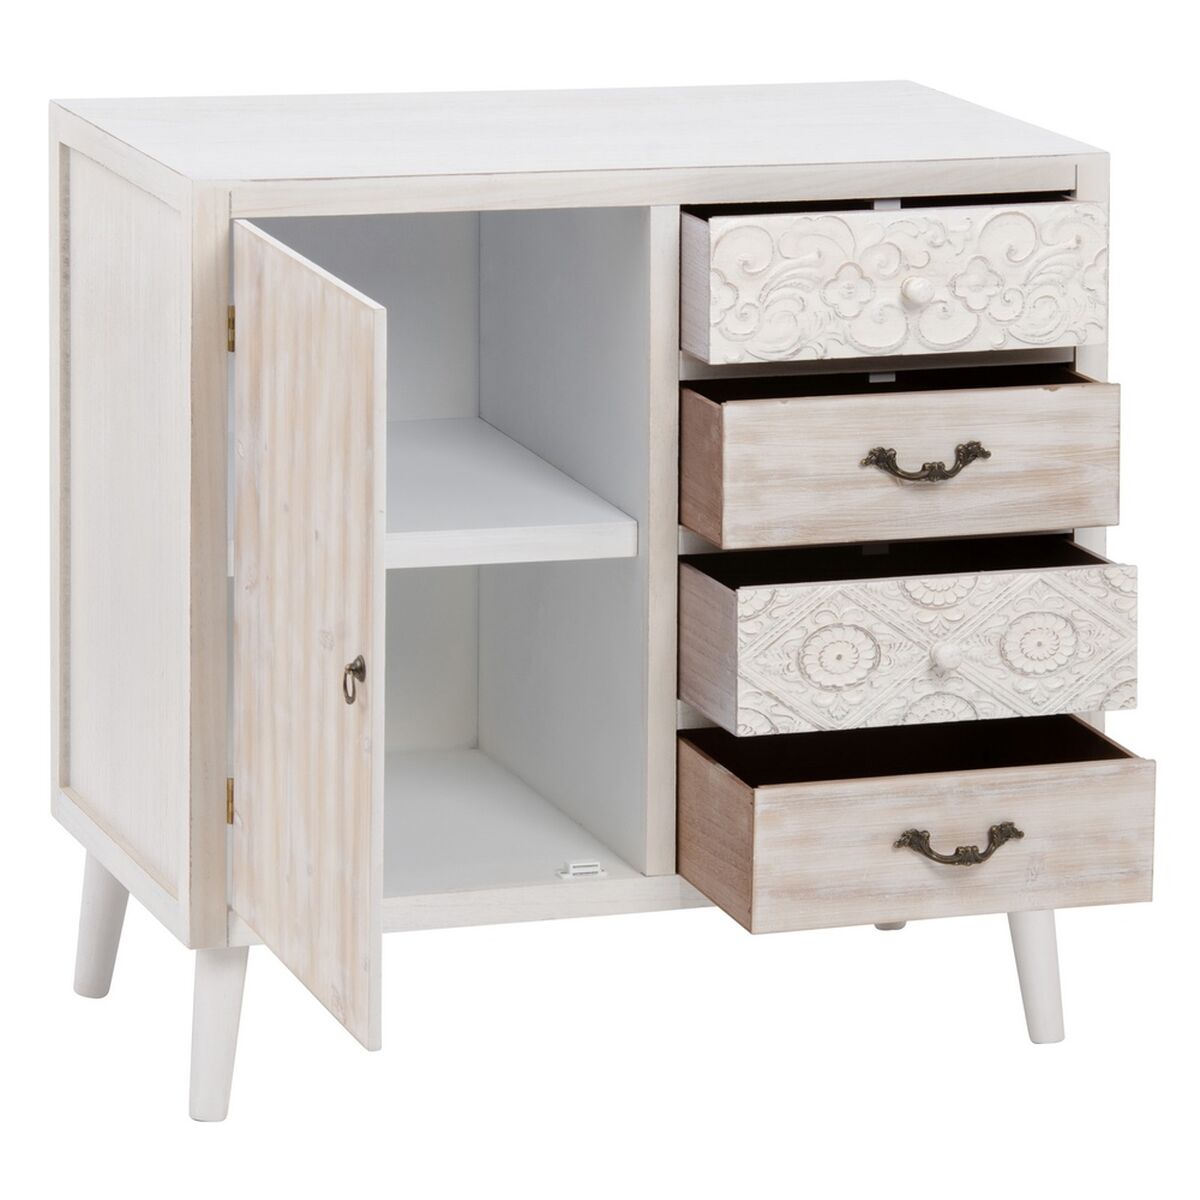 White Hall Table with Drawers and Shelves in Wood (80 x 40 x 80 cm)